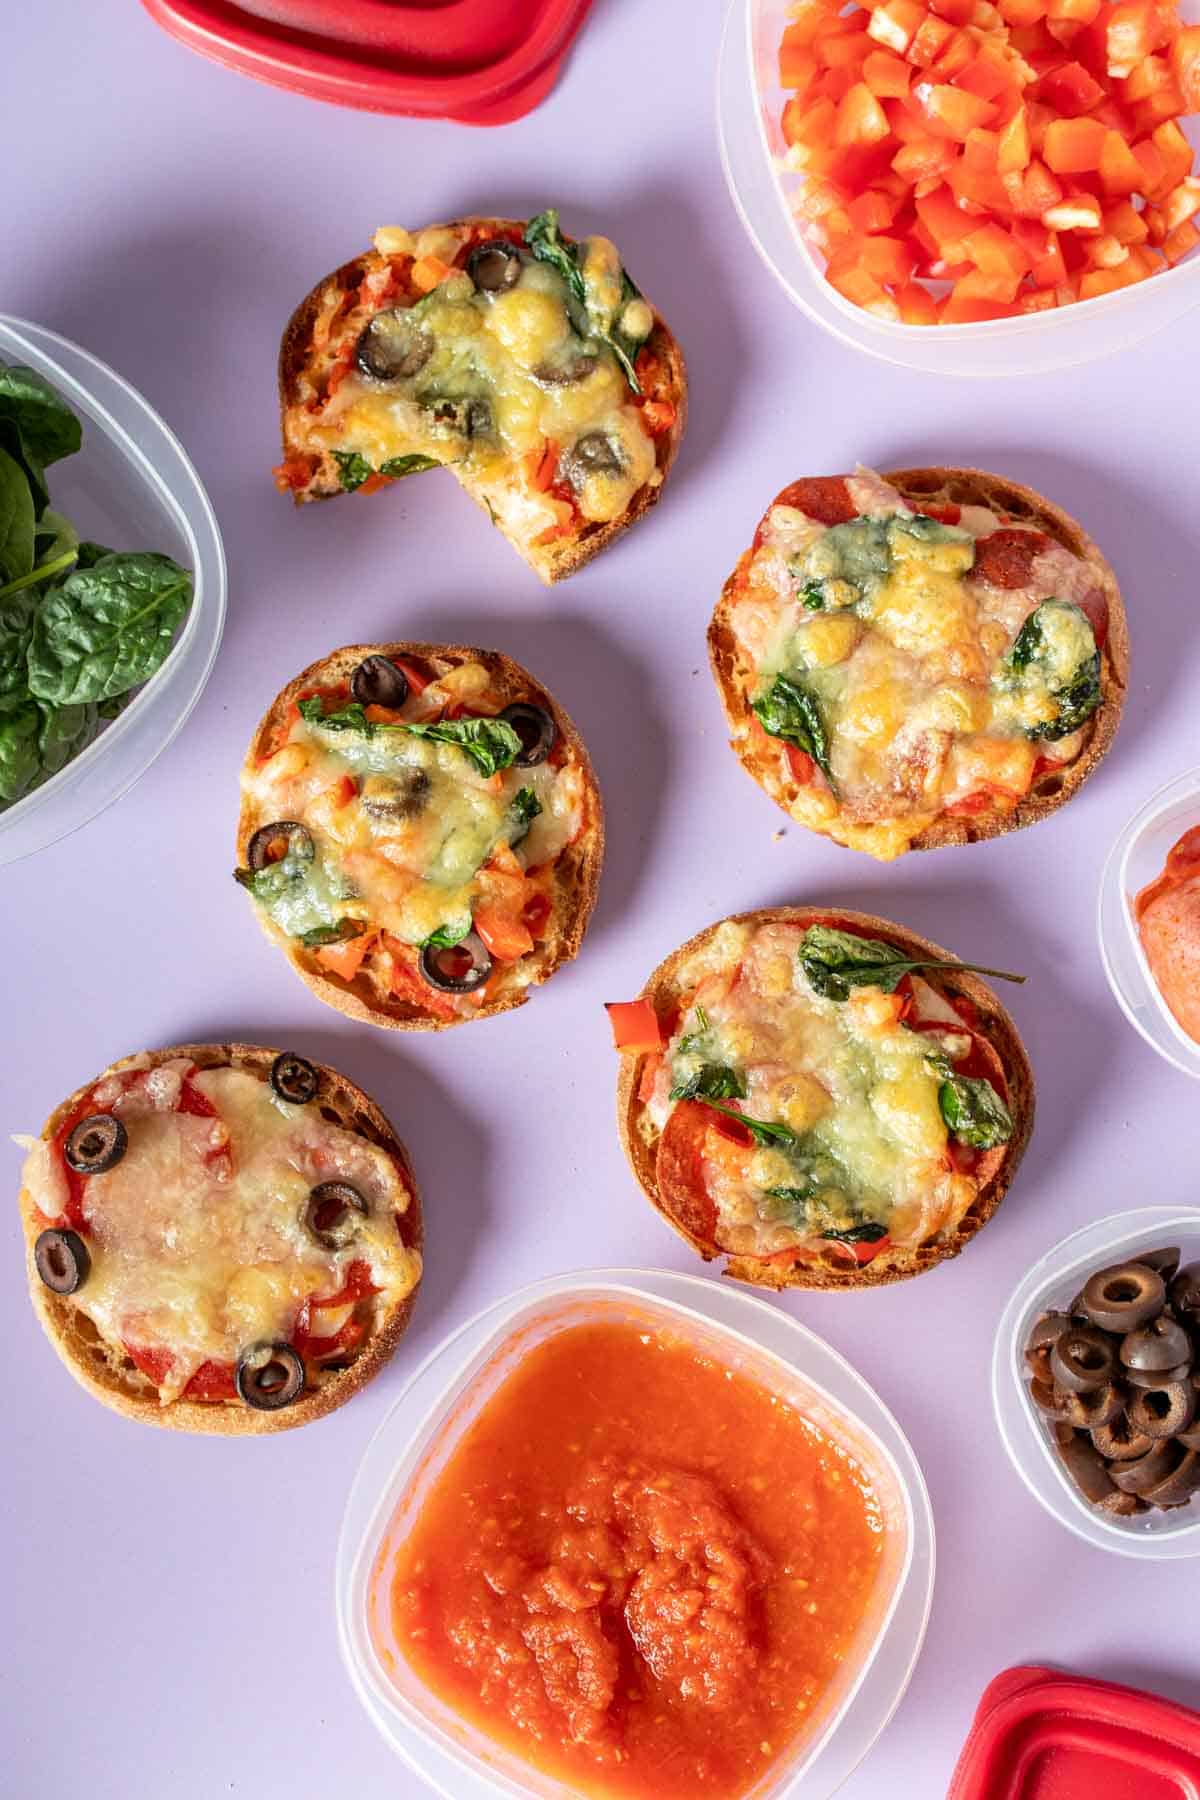 A purple surface with English muffin pizzas and a bite out of one of them and ingredients around them.